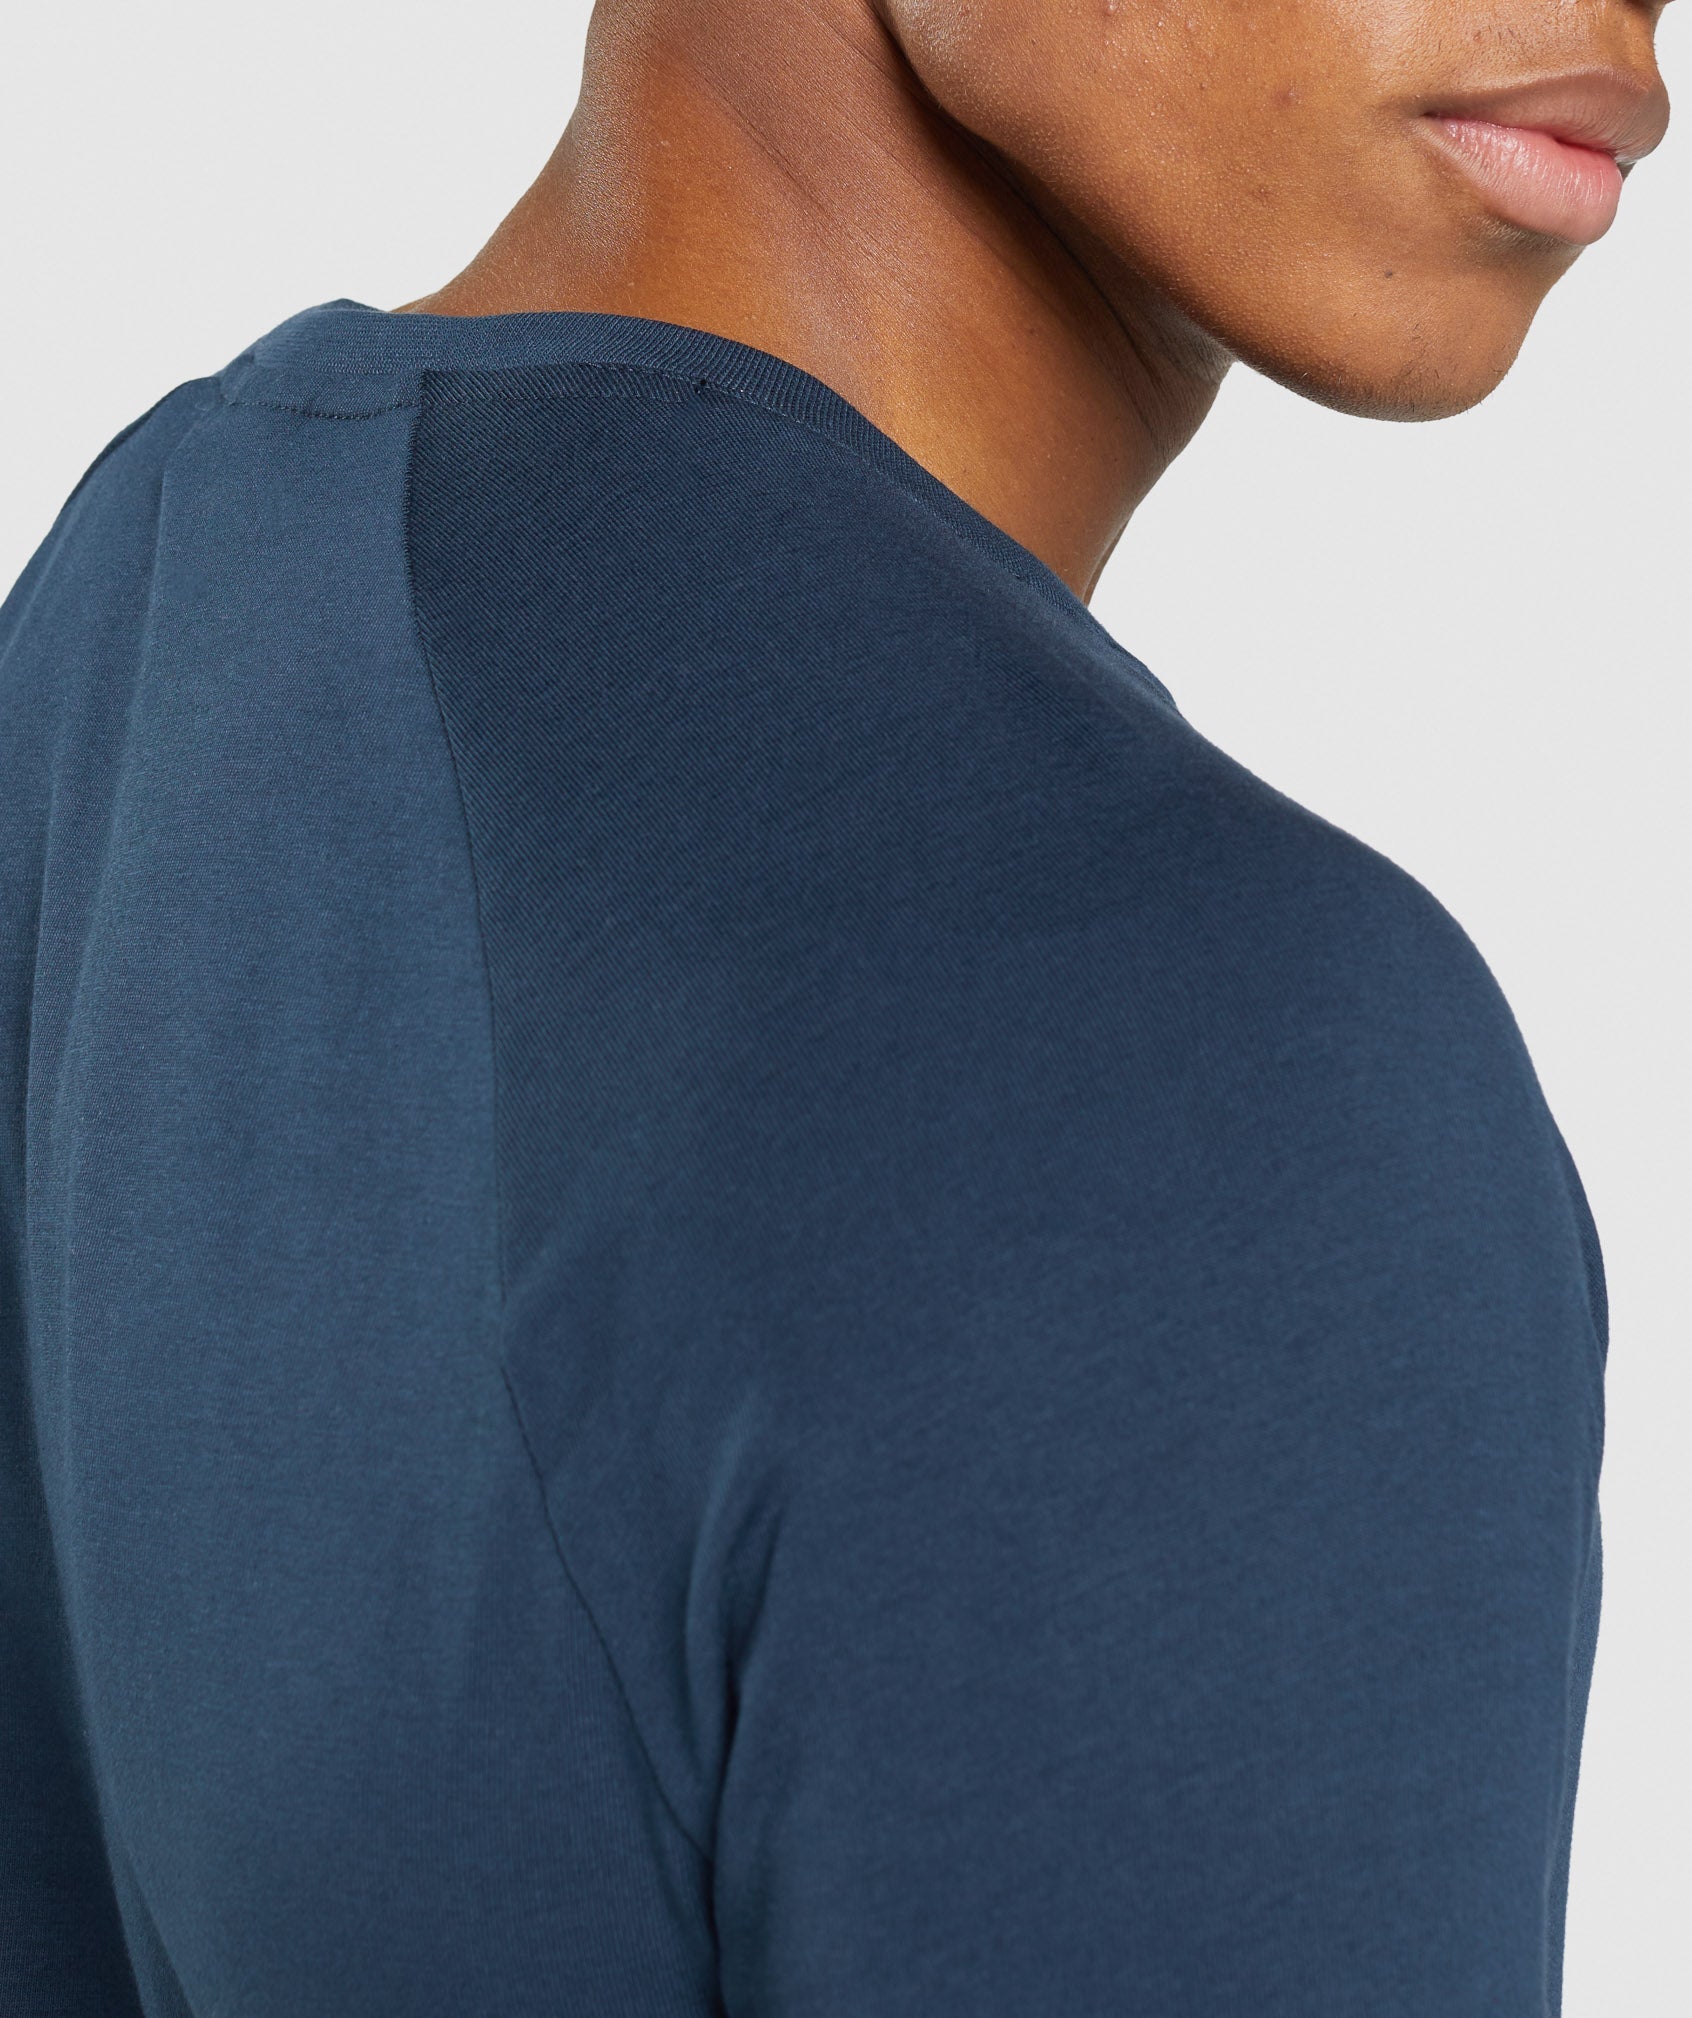 Apollo Long Sleeve T-Shirt in Navy - view 6